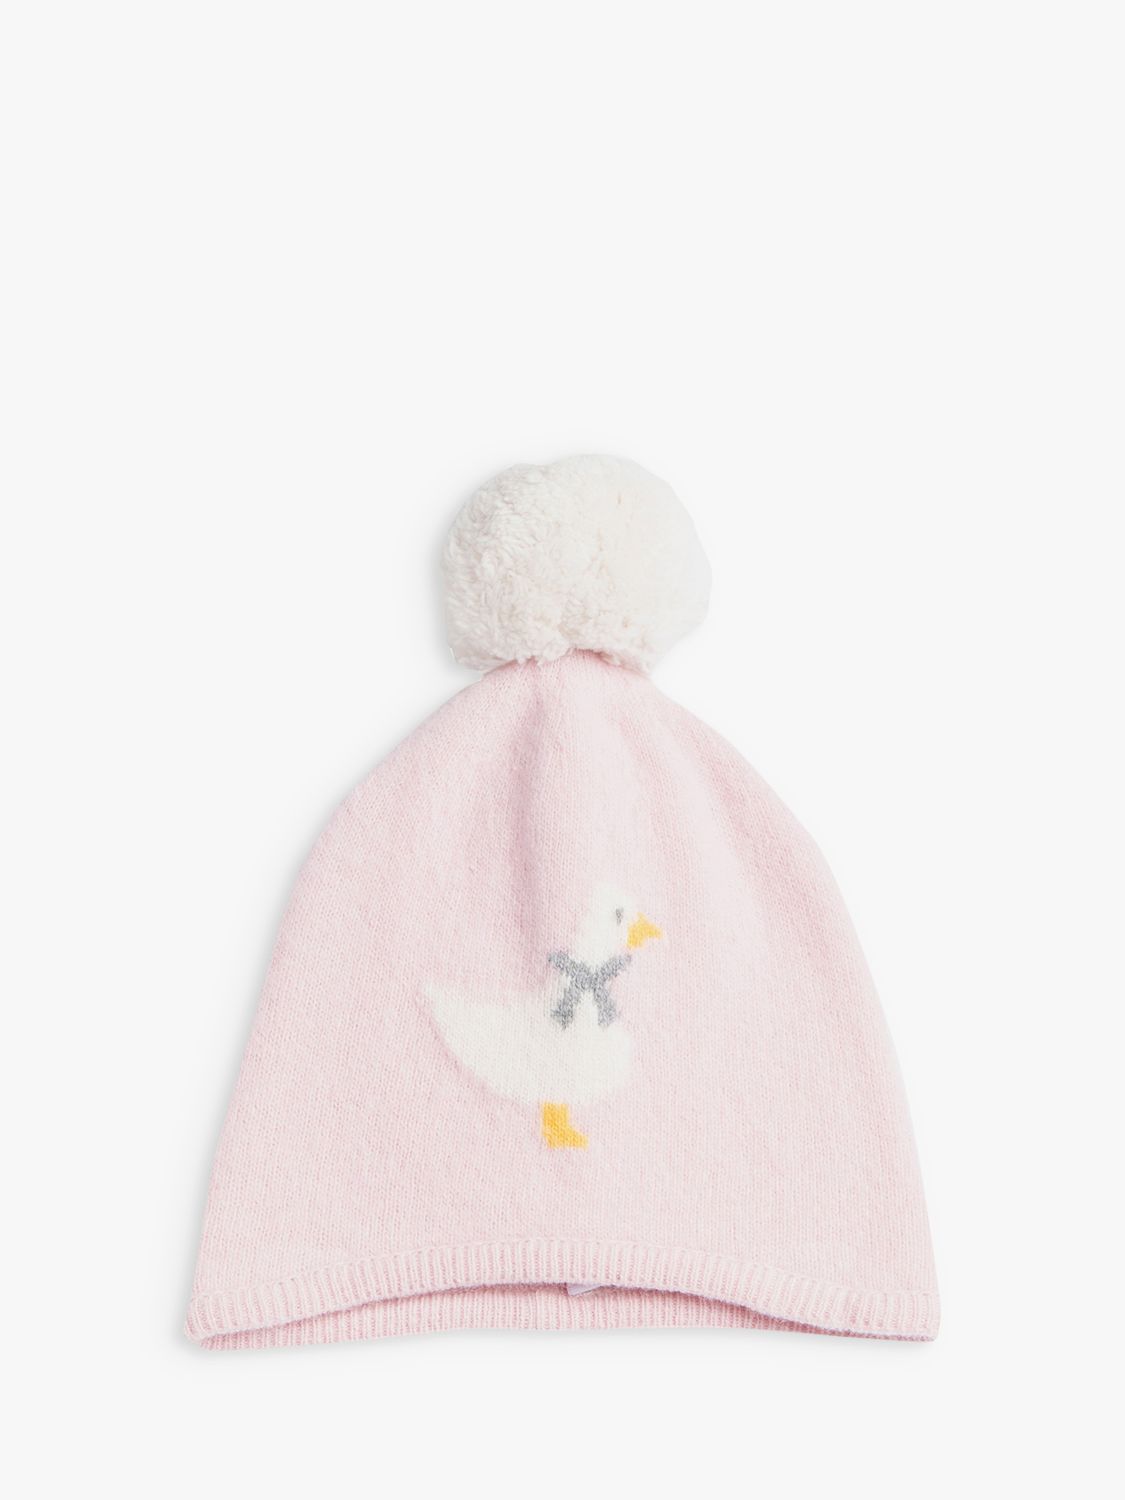 Trotters Baby Jemima Bobble Hat, Pale Pink, S-M